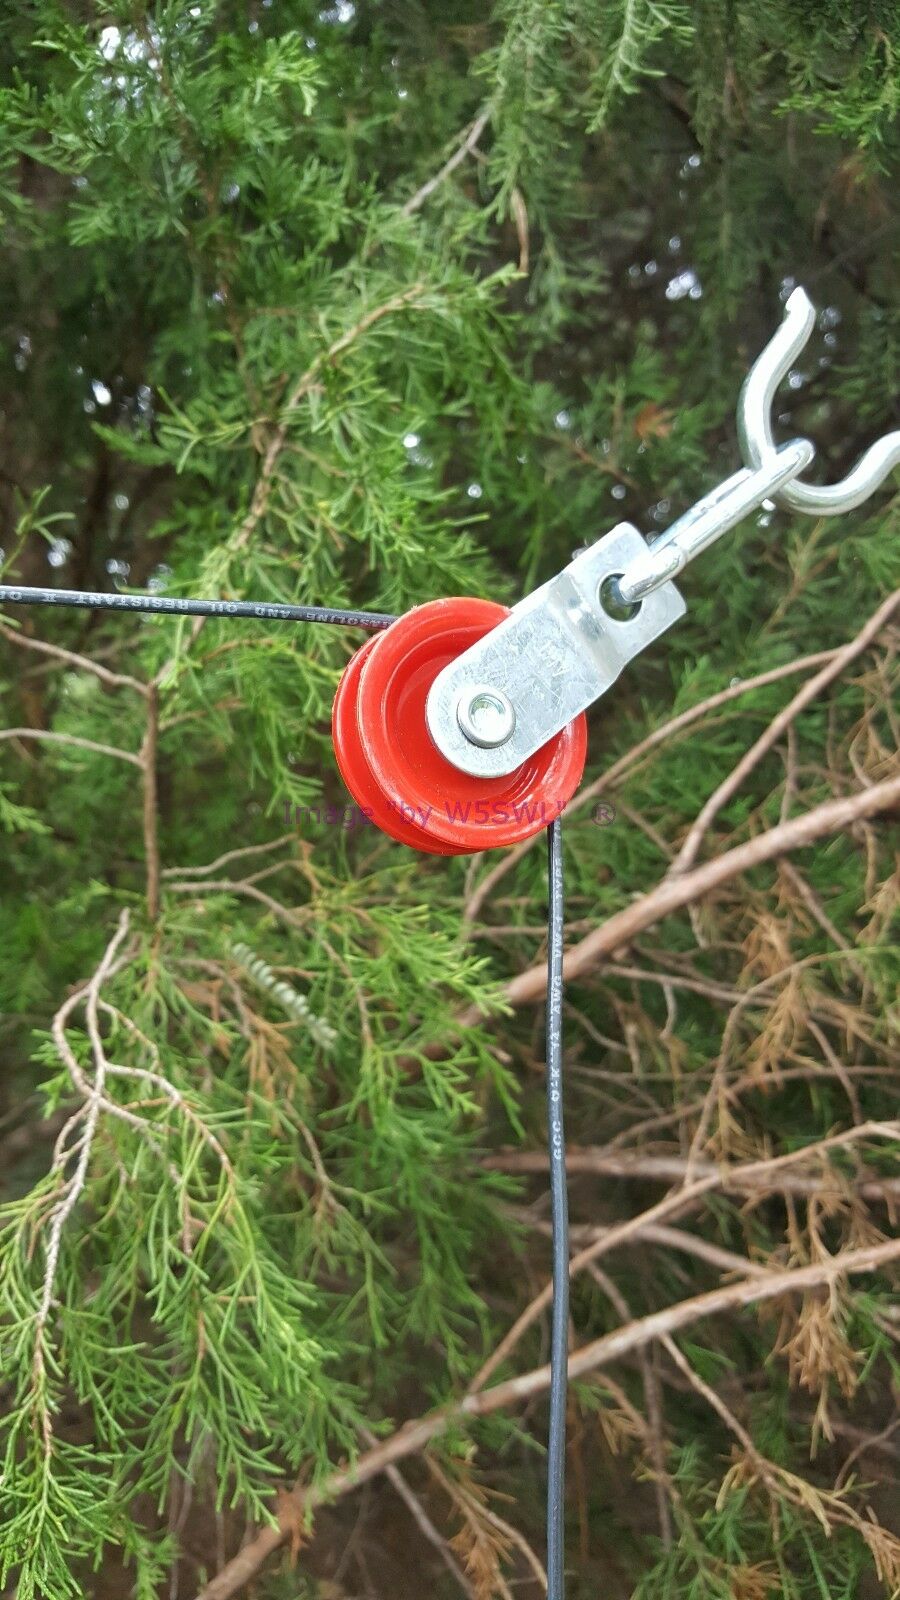 1-3/4" Pulley Ham Radio Dipole Inverted Vee Loop Longwire End Fed Antenna - Dave's Hobby Shop by W5SWL